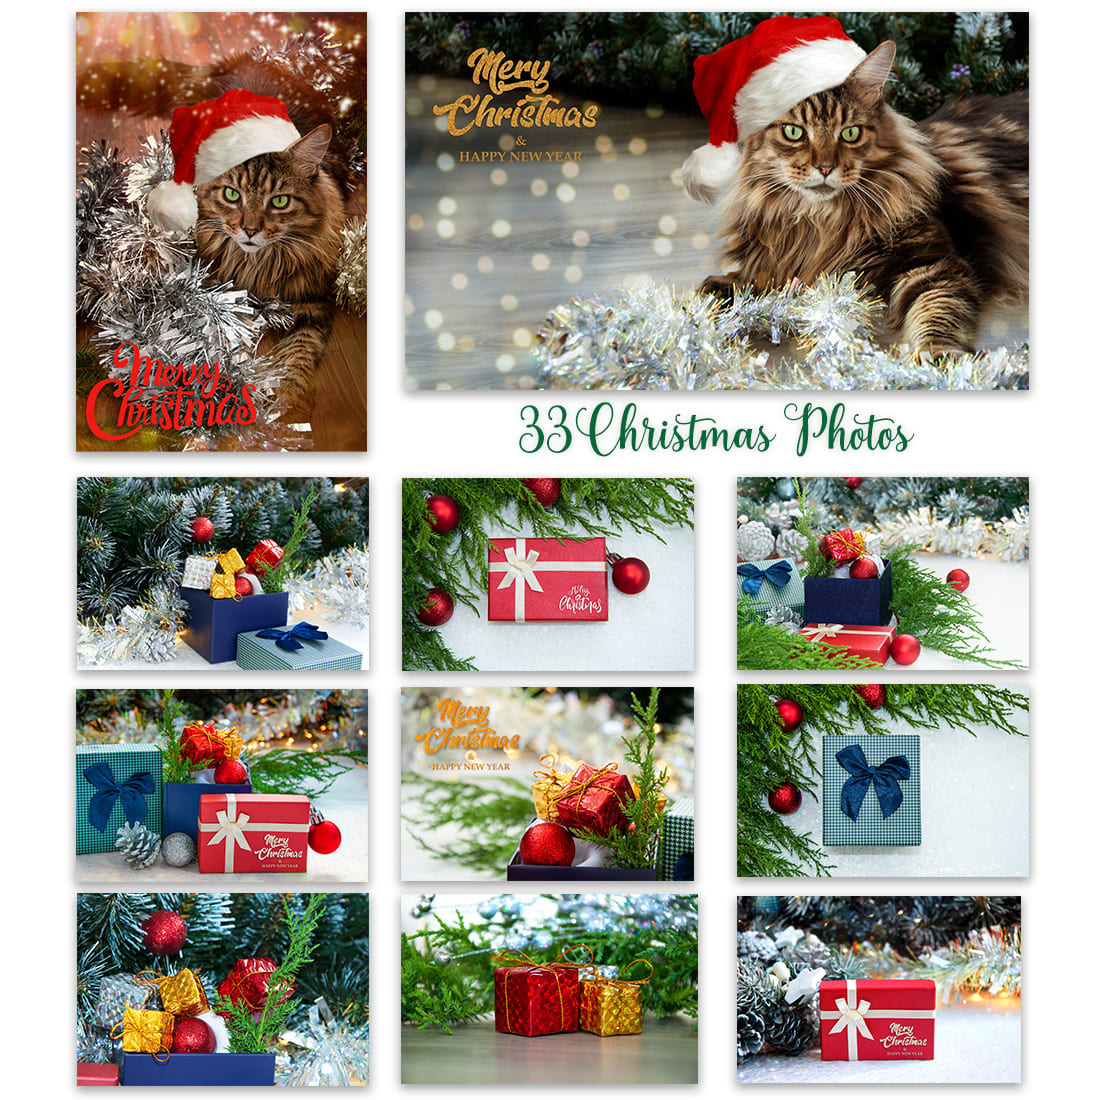 Merry Christmas Photos and Backgrounds Set cover image.